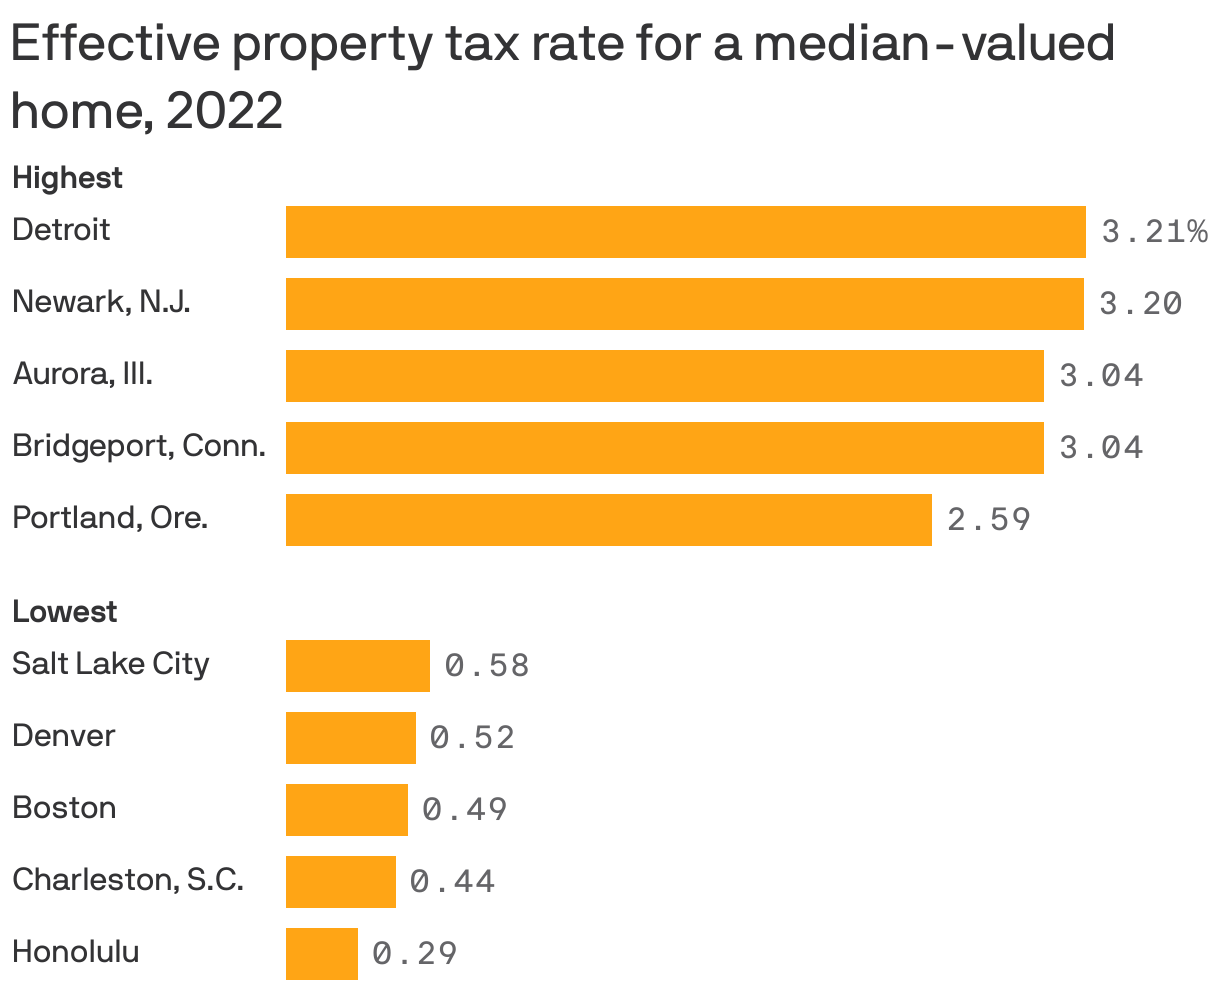 Effective property tax rate for a median-valued home, 2022